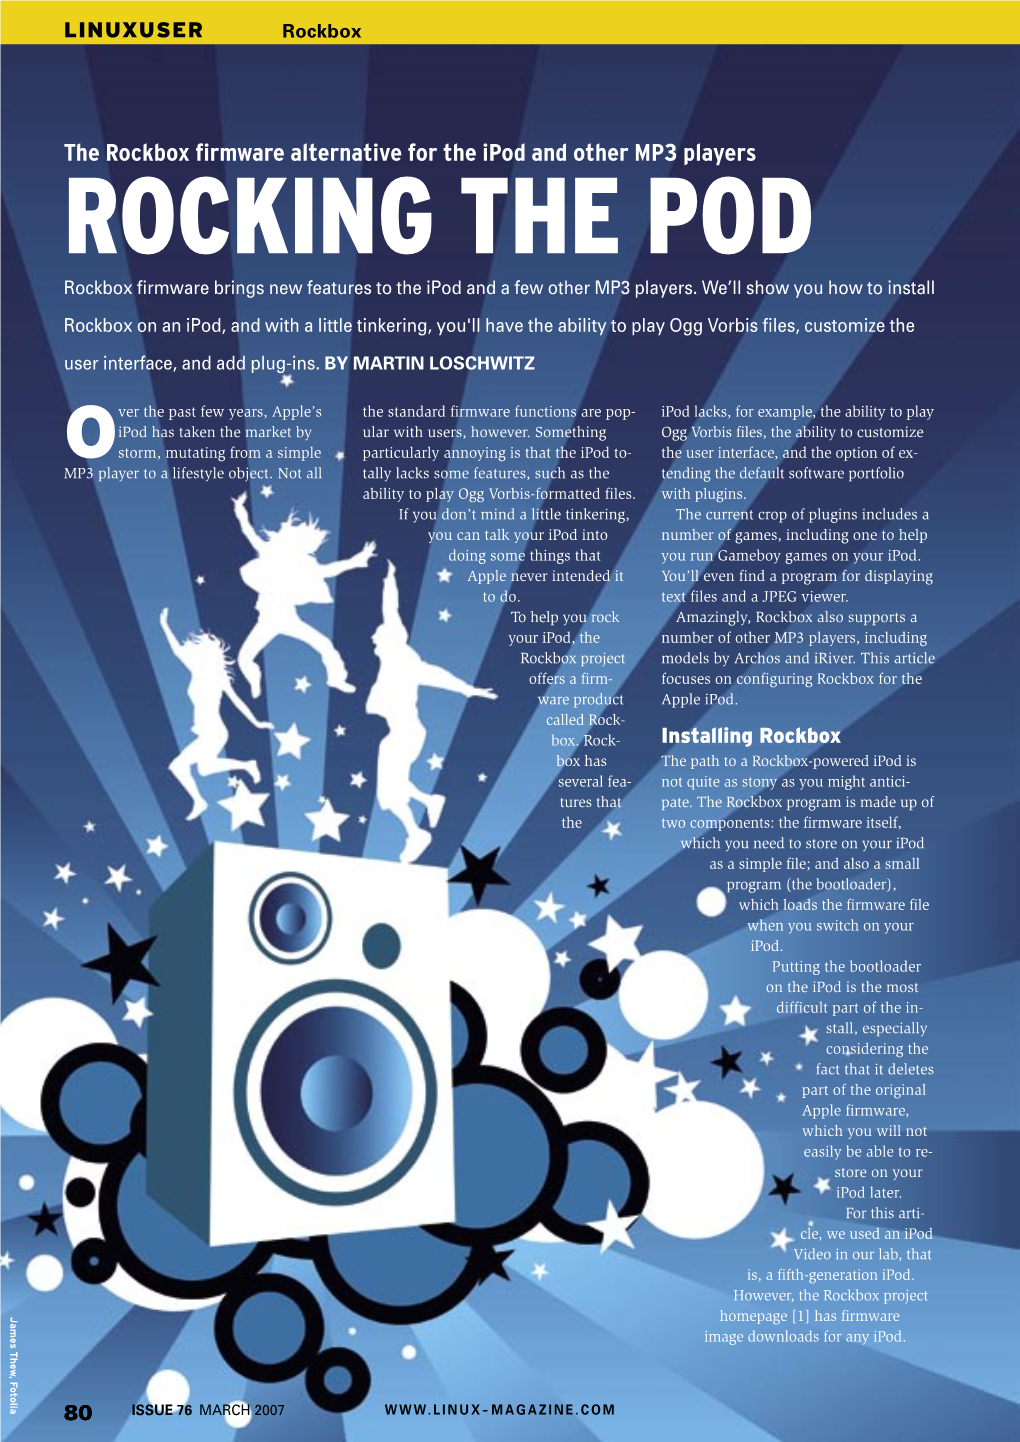 The Rockbox Firmware Alternative for the Ipod and Other MP3 Players ROCKING the POD Rockbox Firmware Brings New Features to the Ipod and a Few Other MP3 Players